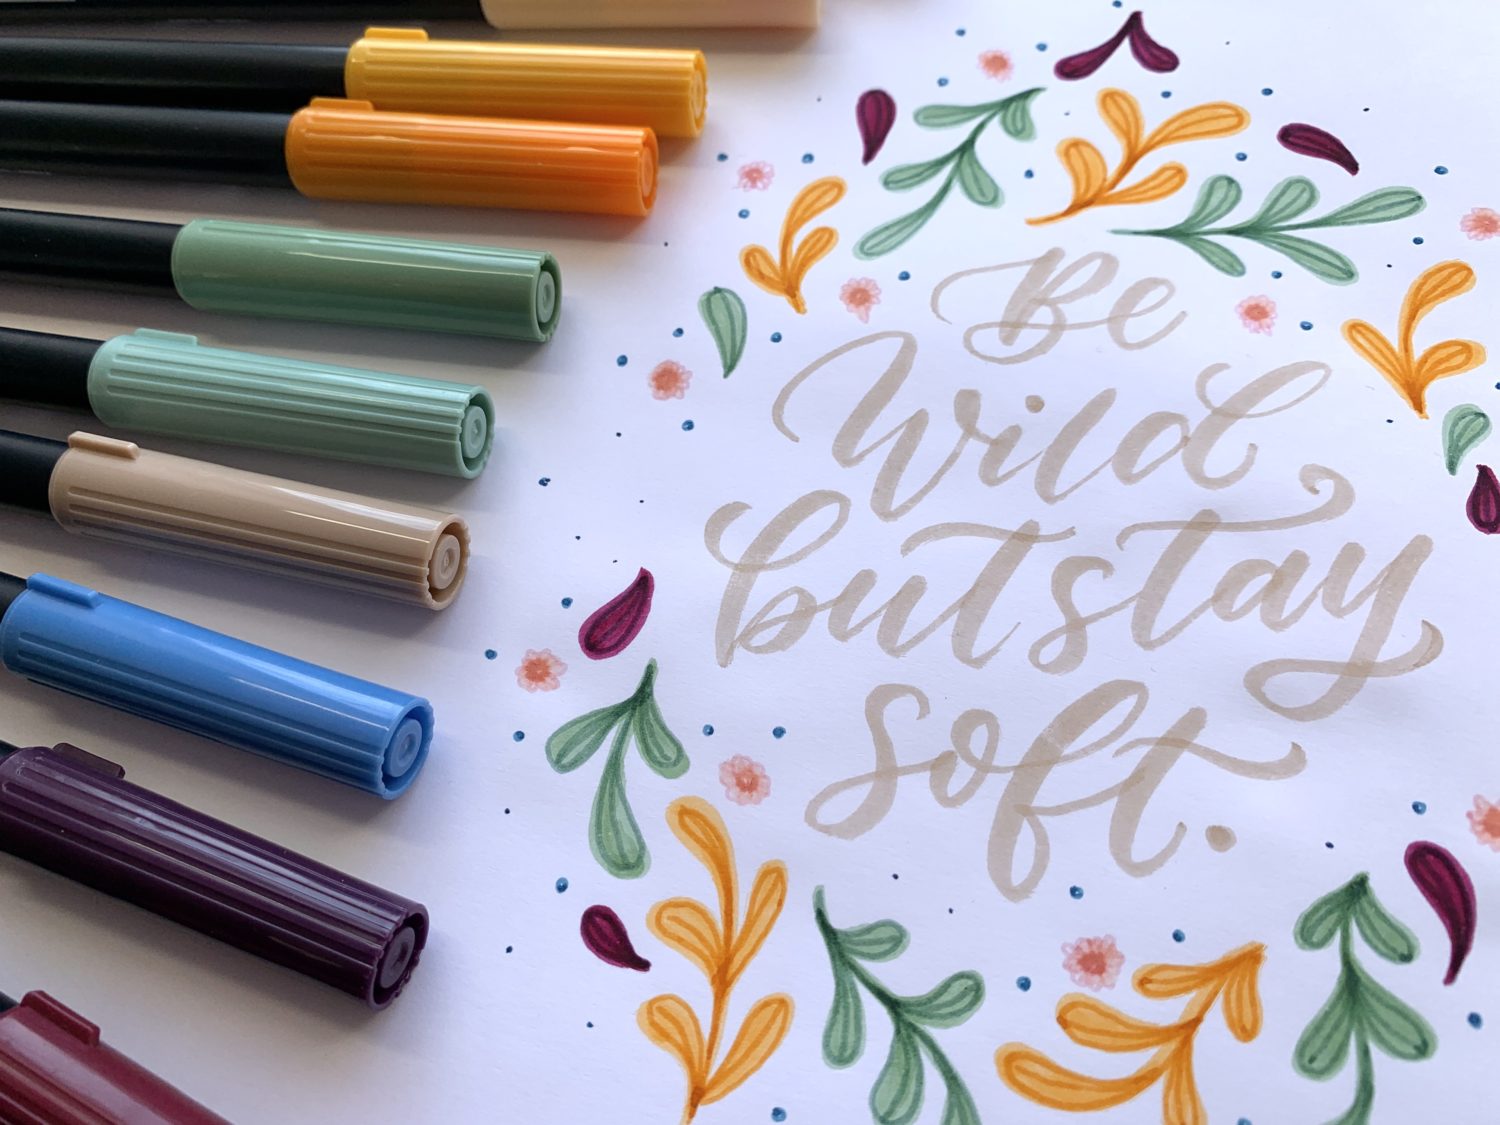 The Best Brush Pens for Calligraphy